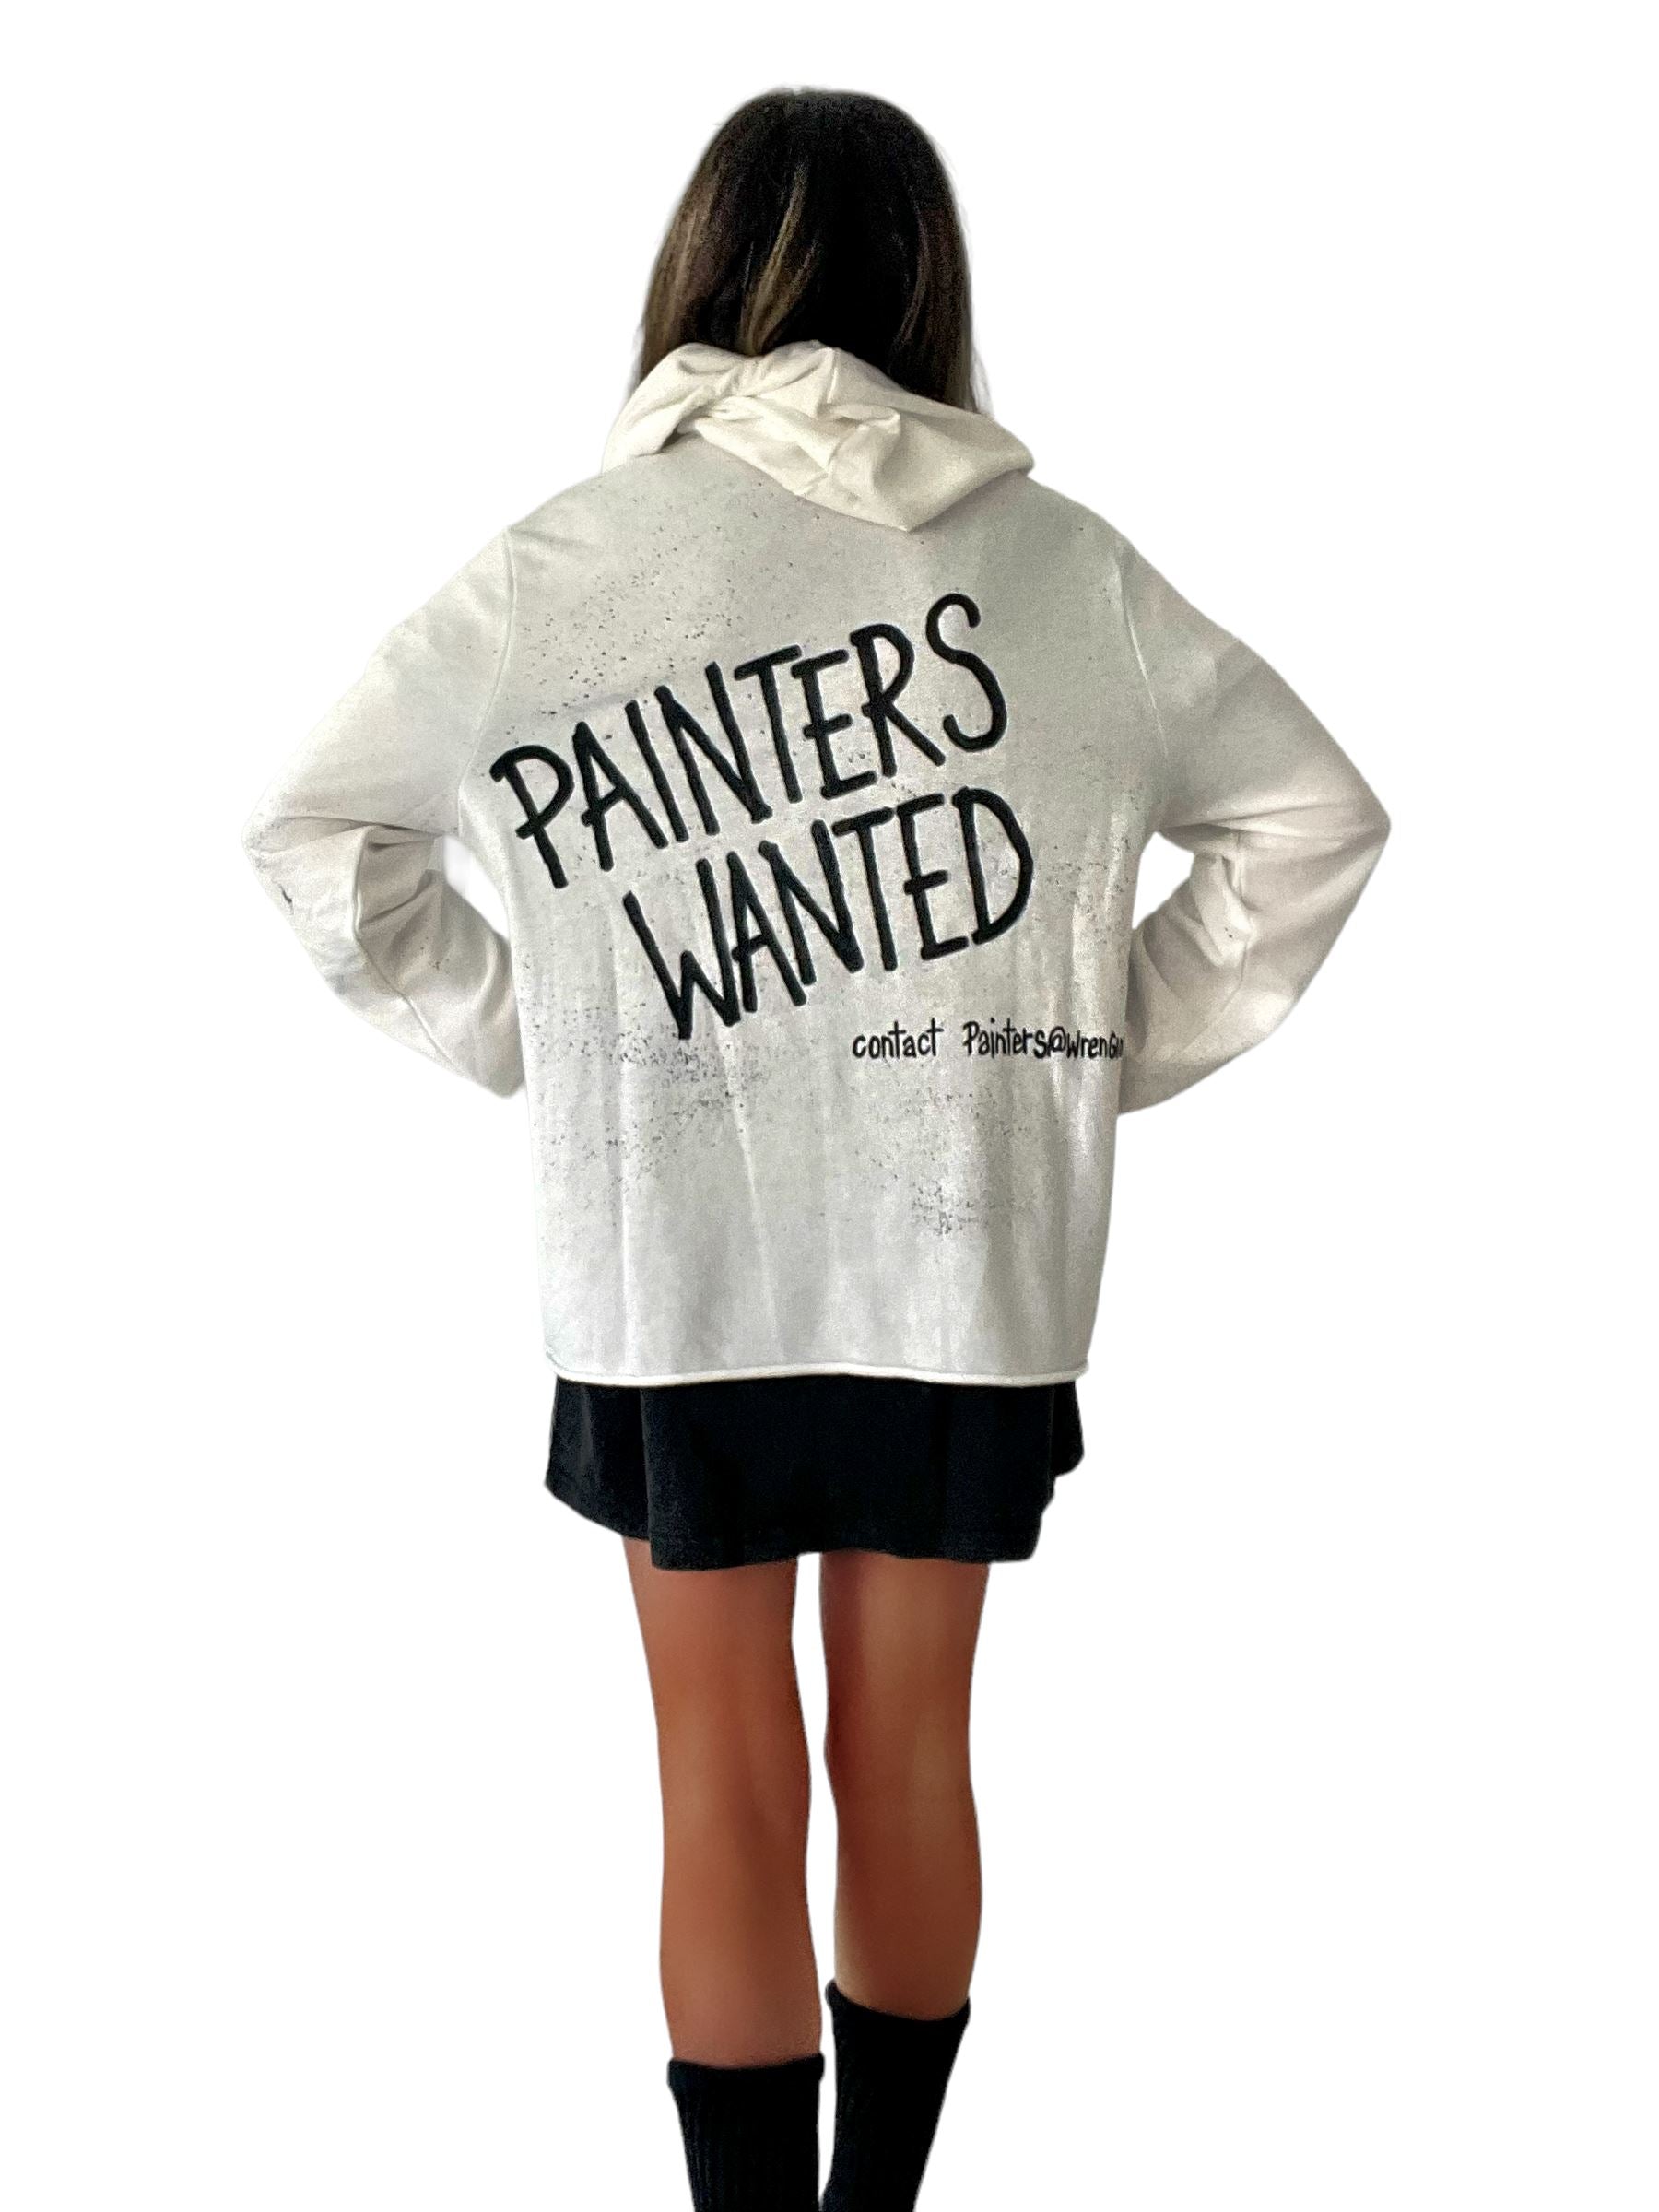 'Painter's Wanted' Painted Hoodie